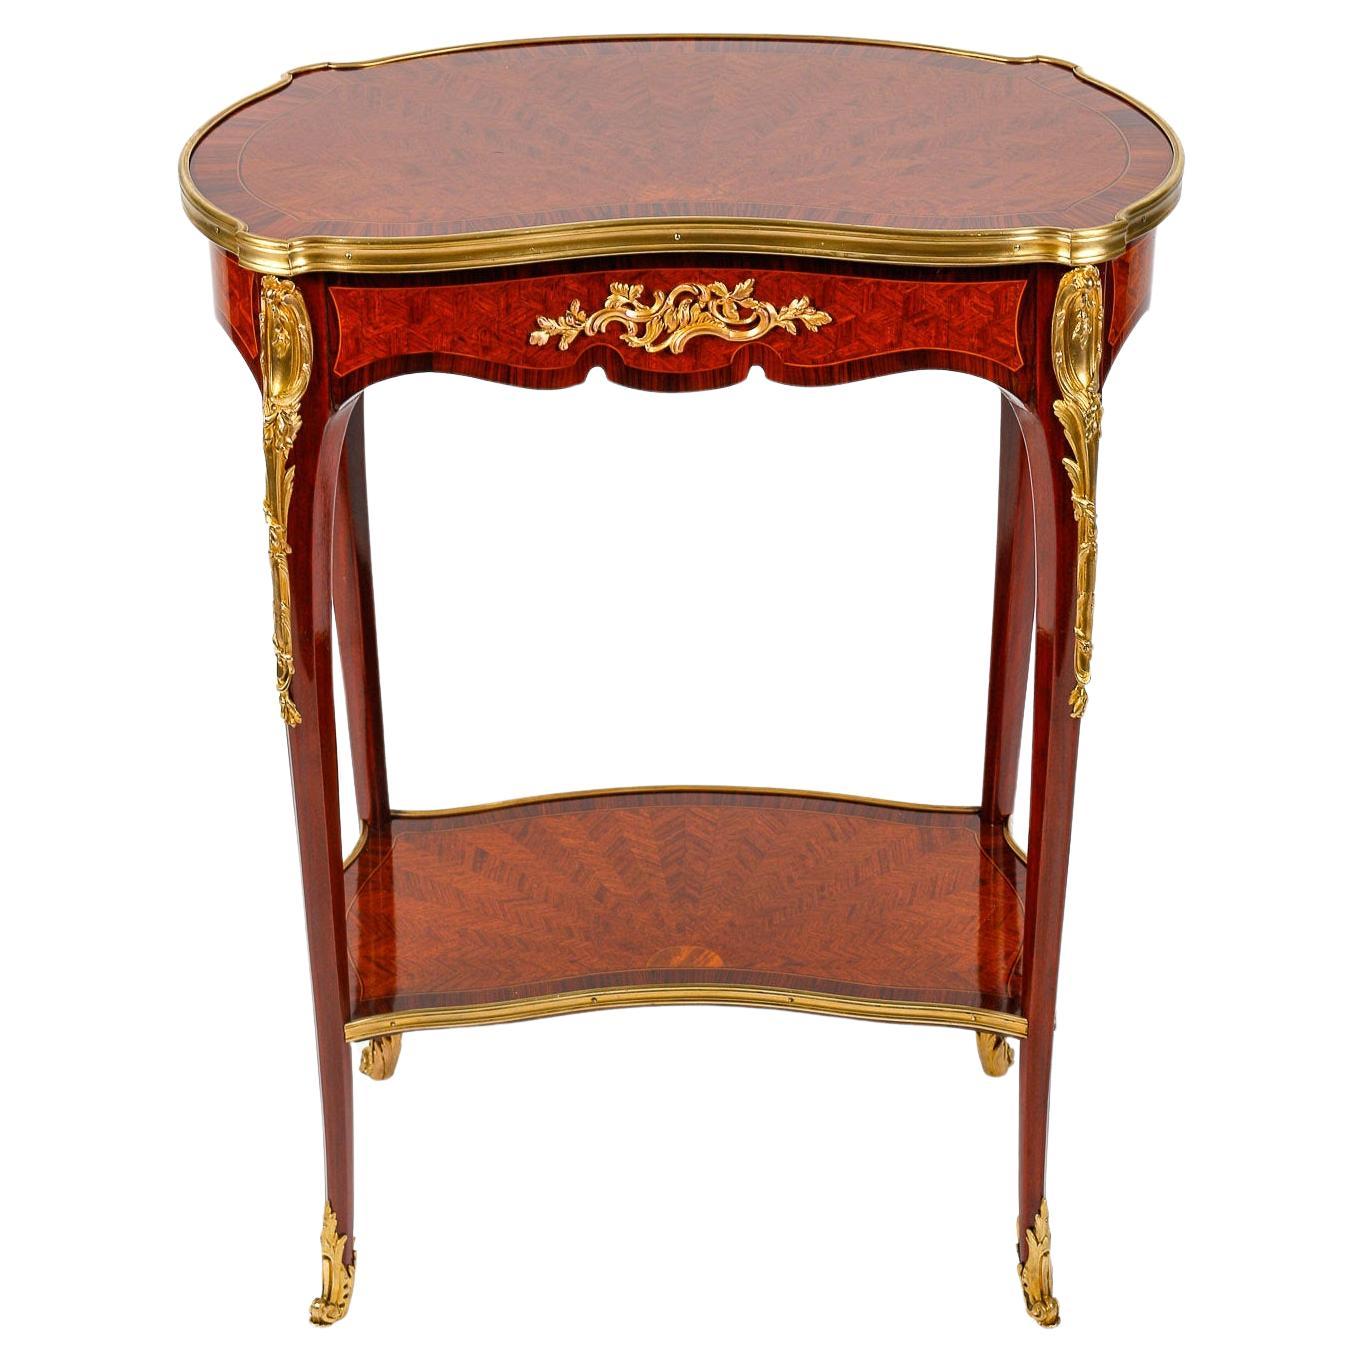 Small Side Table, End of Sofa, Louis XV Style, 19th Century.